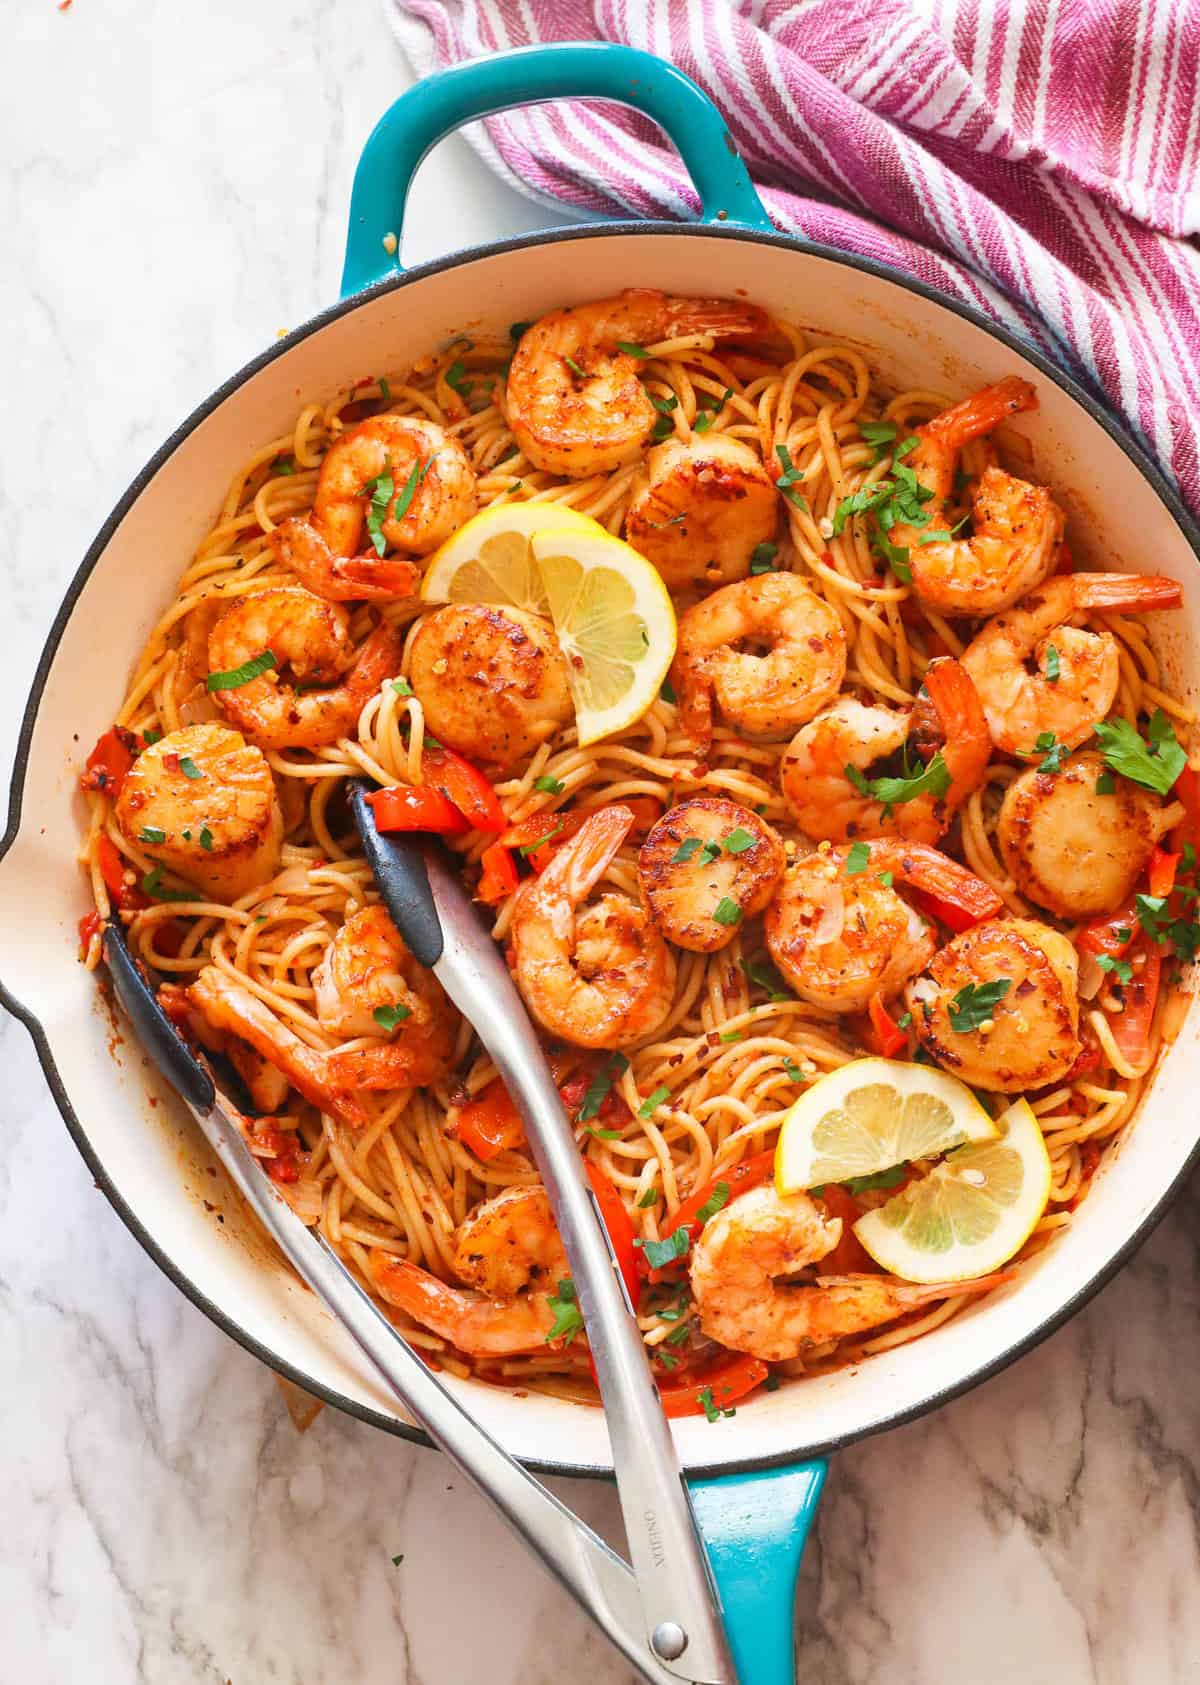 Mouthwatering seafood pasta with lemon wedges